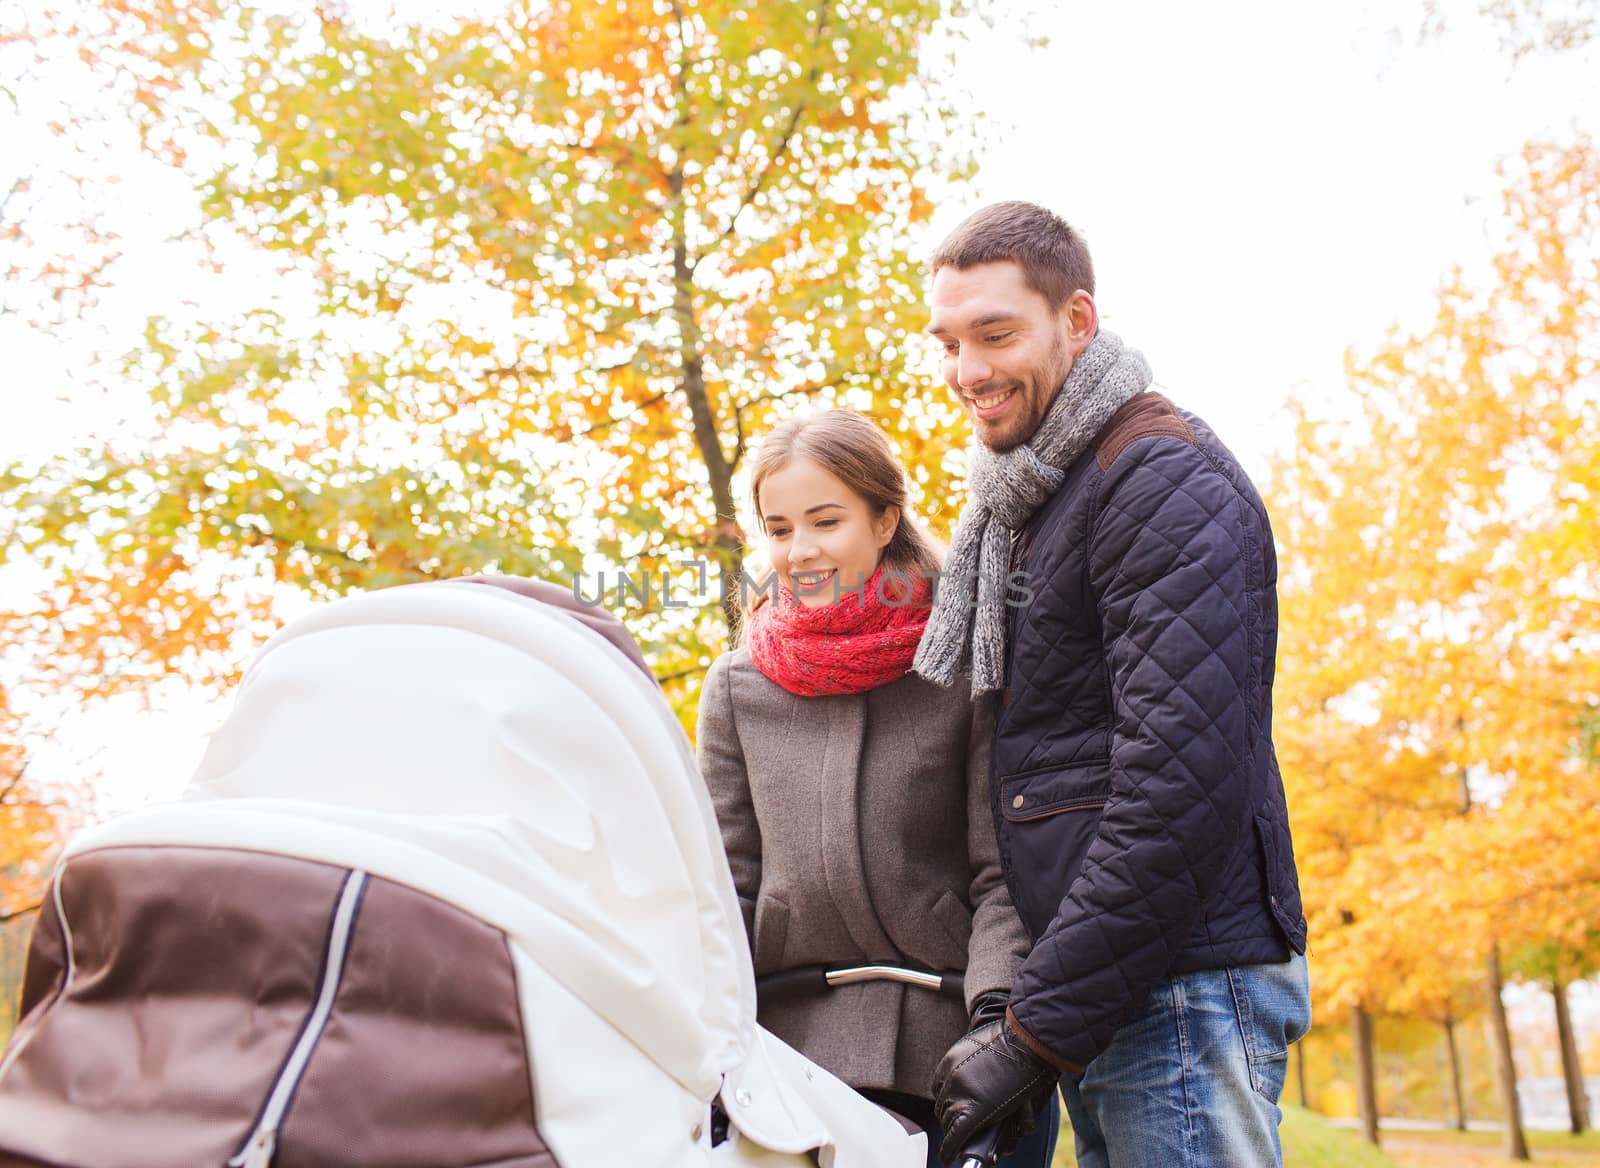 smiling couple with baby pram in autumn park by dolgachov